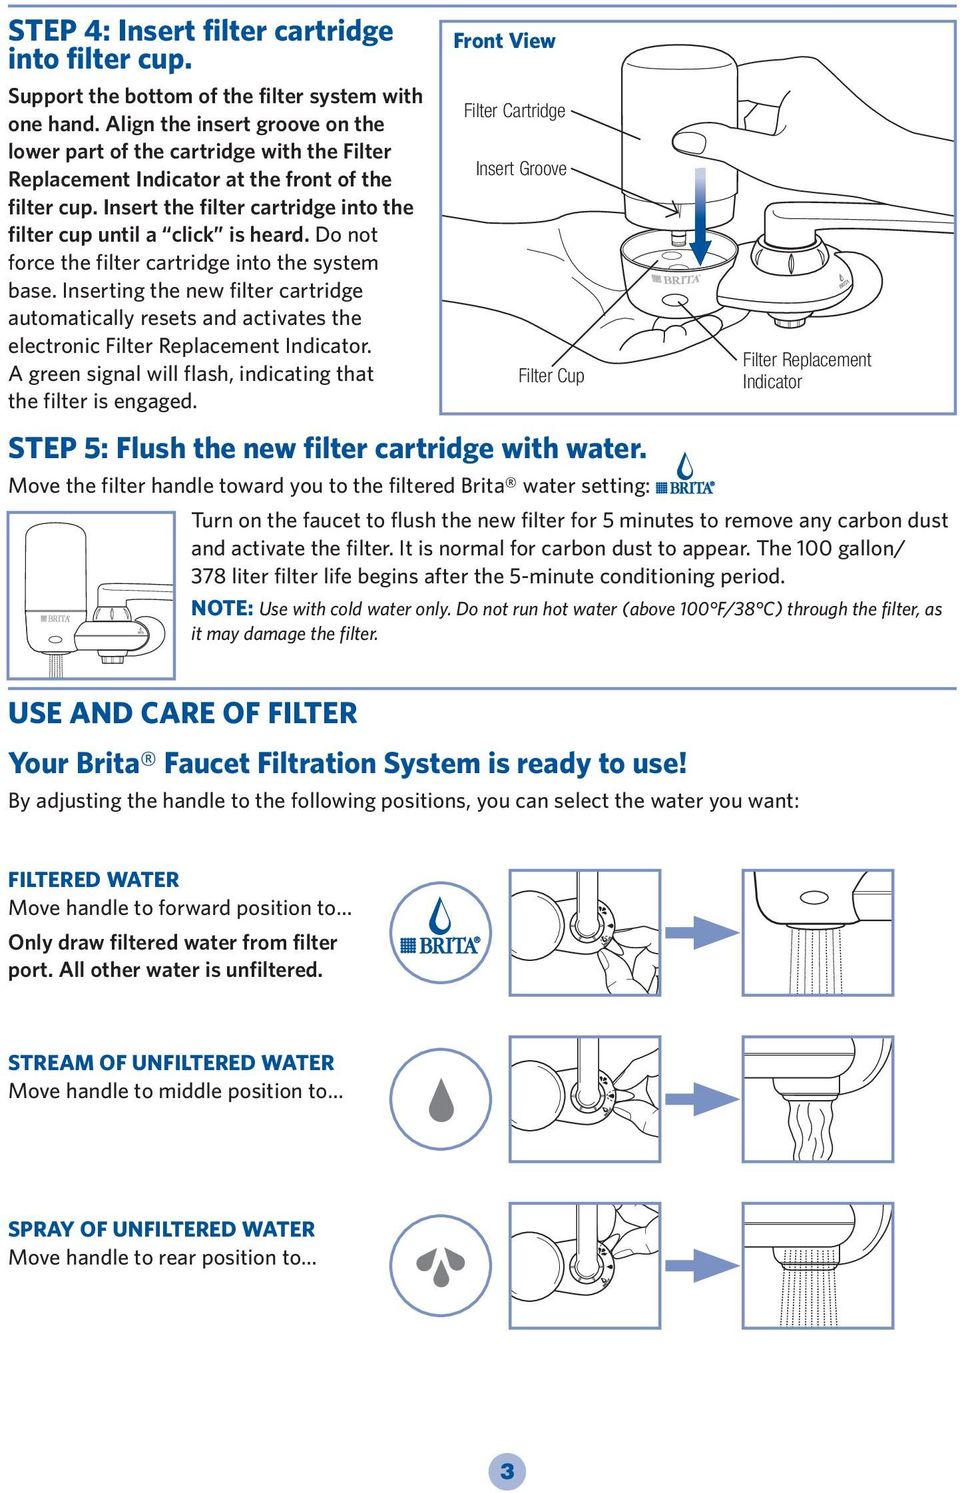 Do not force the filter cartridge into the system base. Inserting the new filter cartridge automatically resets and activates the electronic Filter Replacement Indicator.